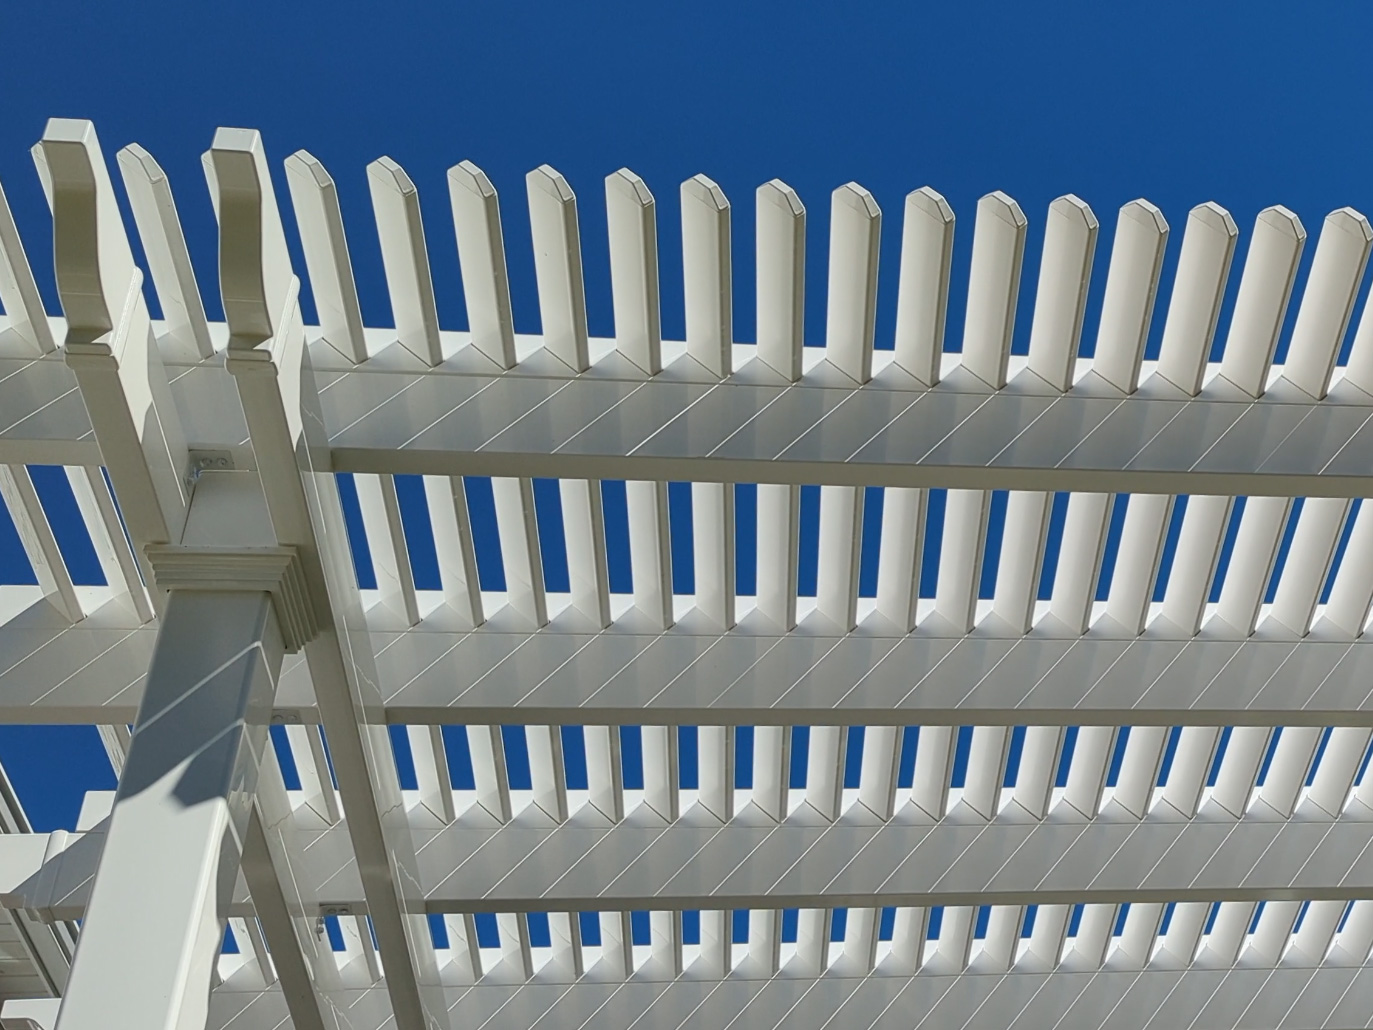 close up of pergola fixed louvers (purlins) on the roof of the pergola